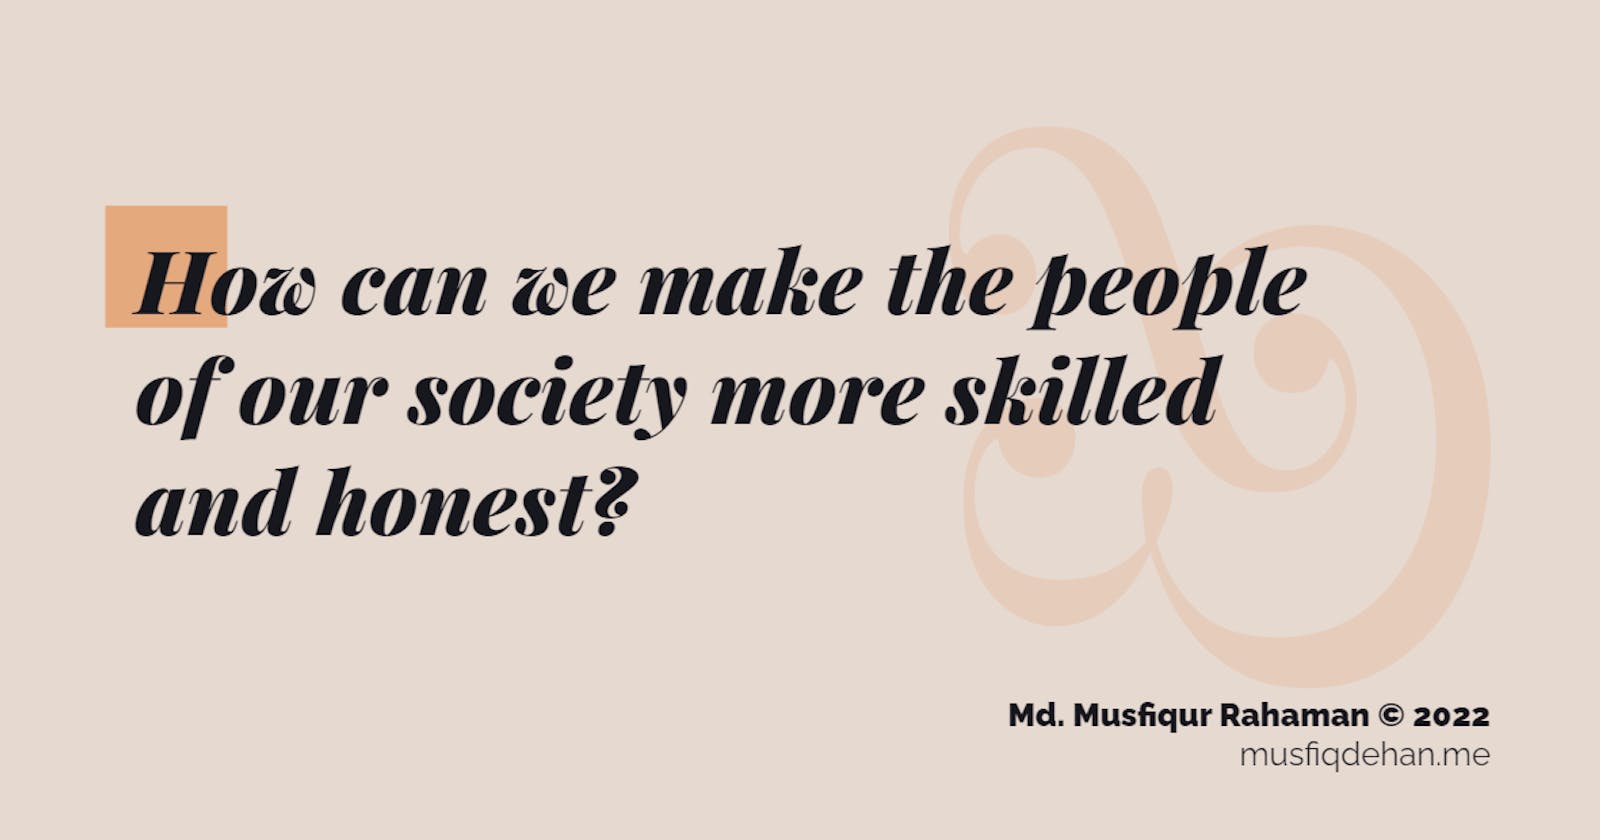 How can we make the people of our society more skilled and honest?